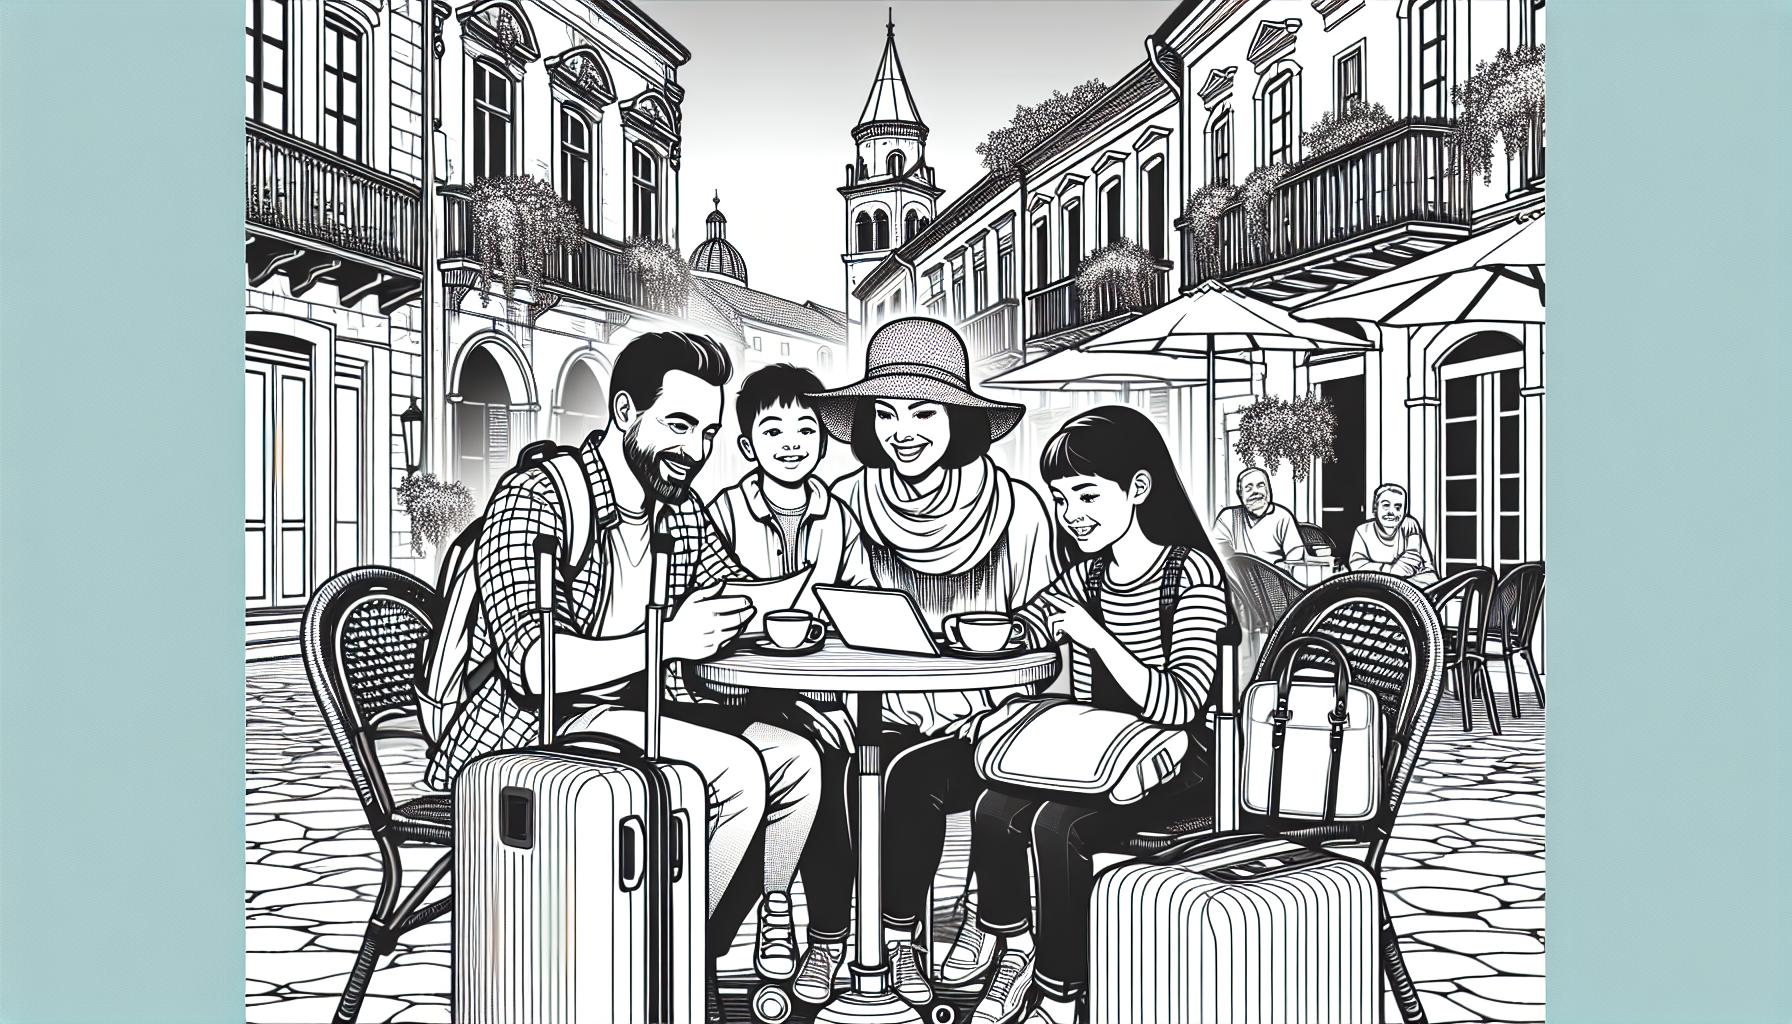 Destinations The Best Digital Nomad Countries For Families ReallyRemoteWorker Explore the best countries for digital nomad families. Learn about vital considerations like local laws, family-friendly accommodations, and building connections with other nomads. Get wise tips for smoother transitions and making precious memories in your nomadic journey.